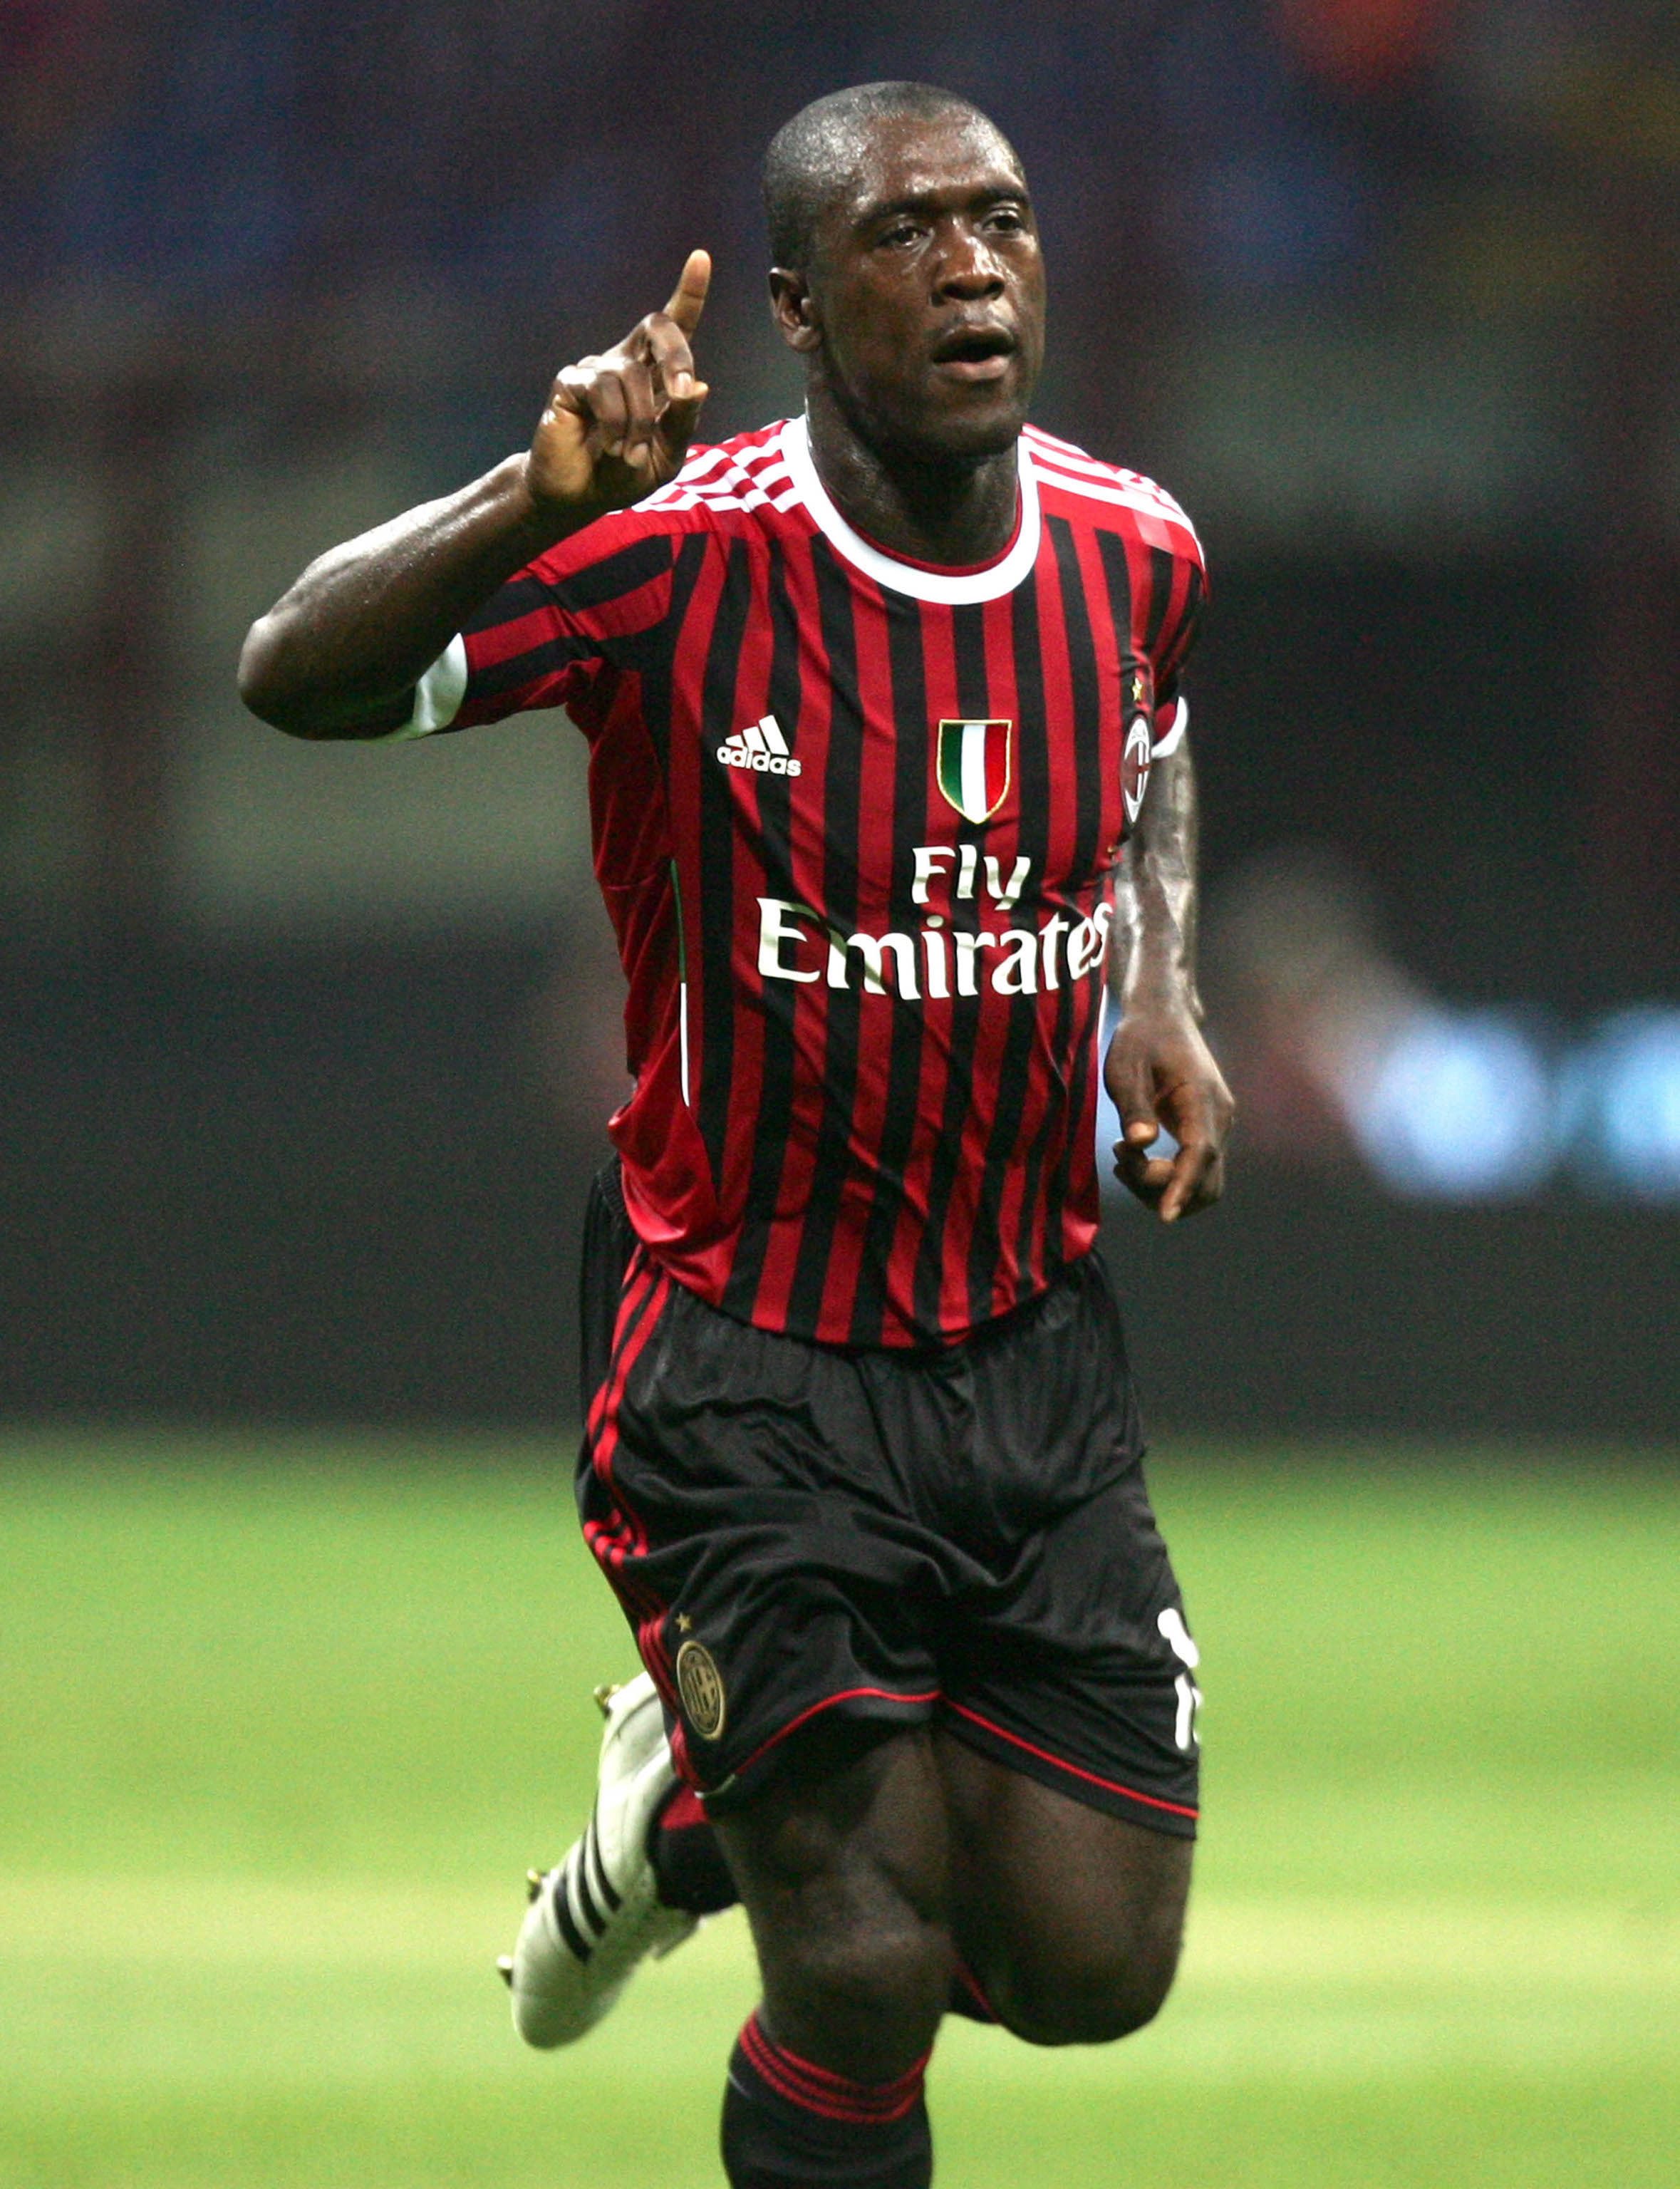 Seedorf is considered by many as one of the best midfielders of all time